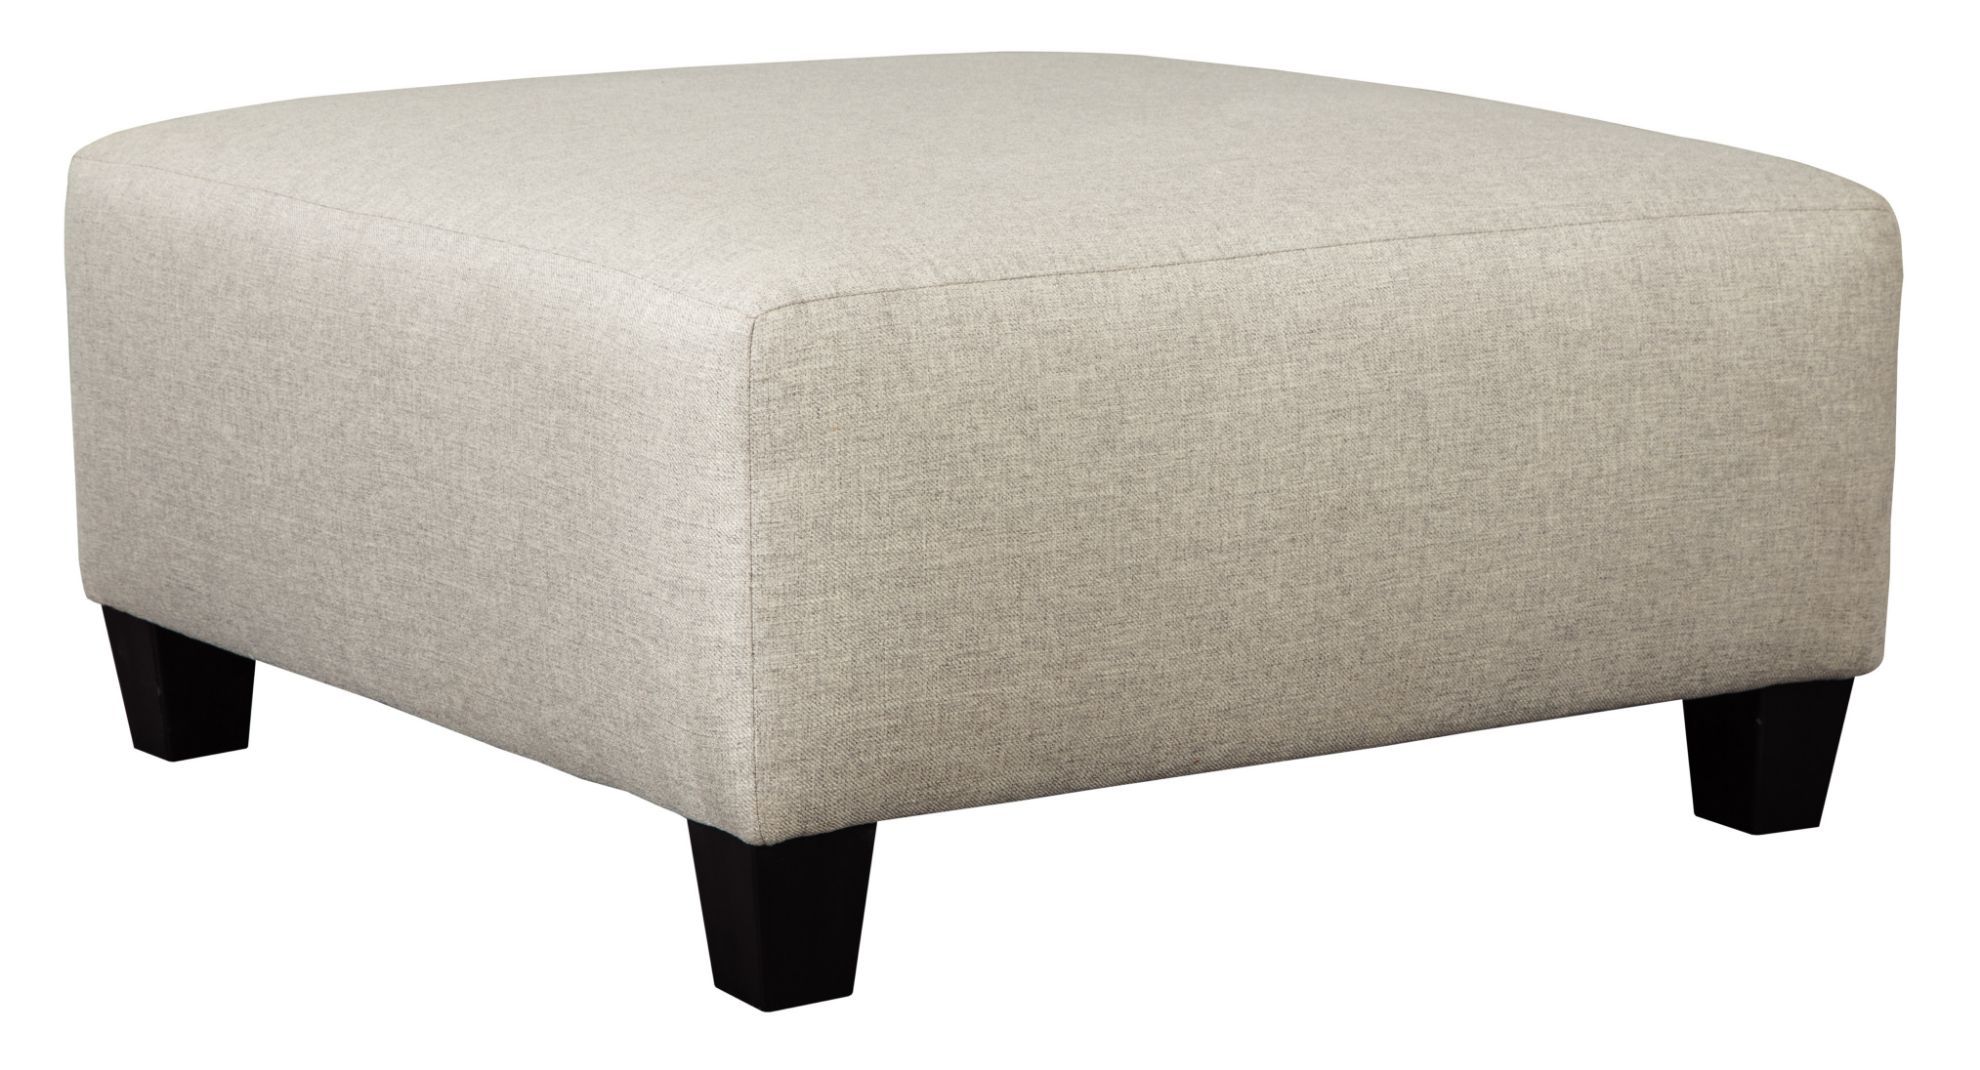 Picture of Hallenberg Oversized Ottoman